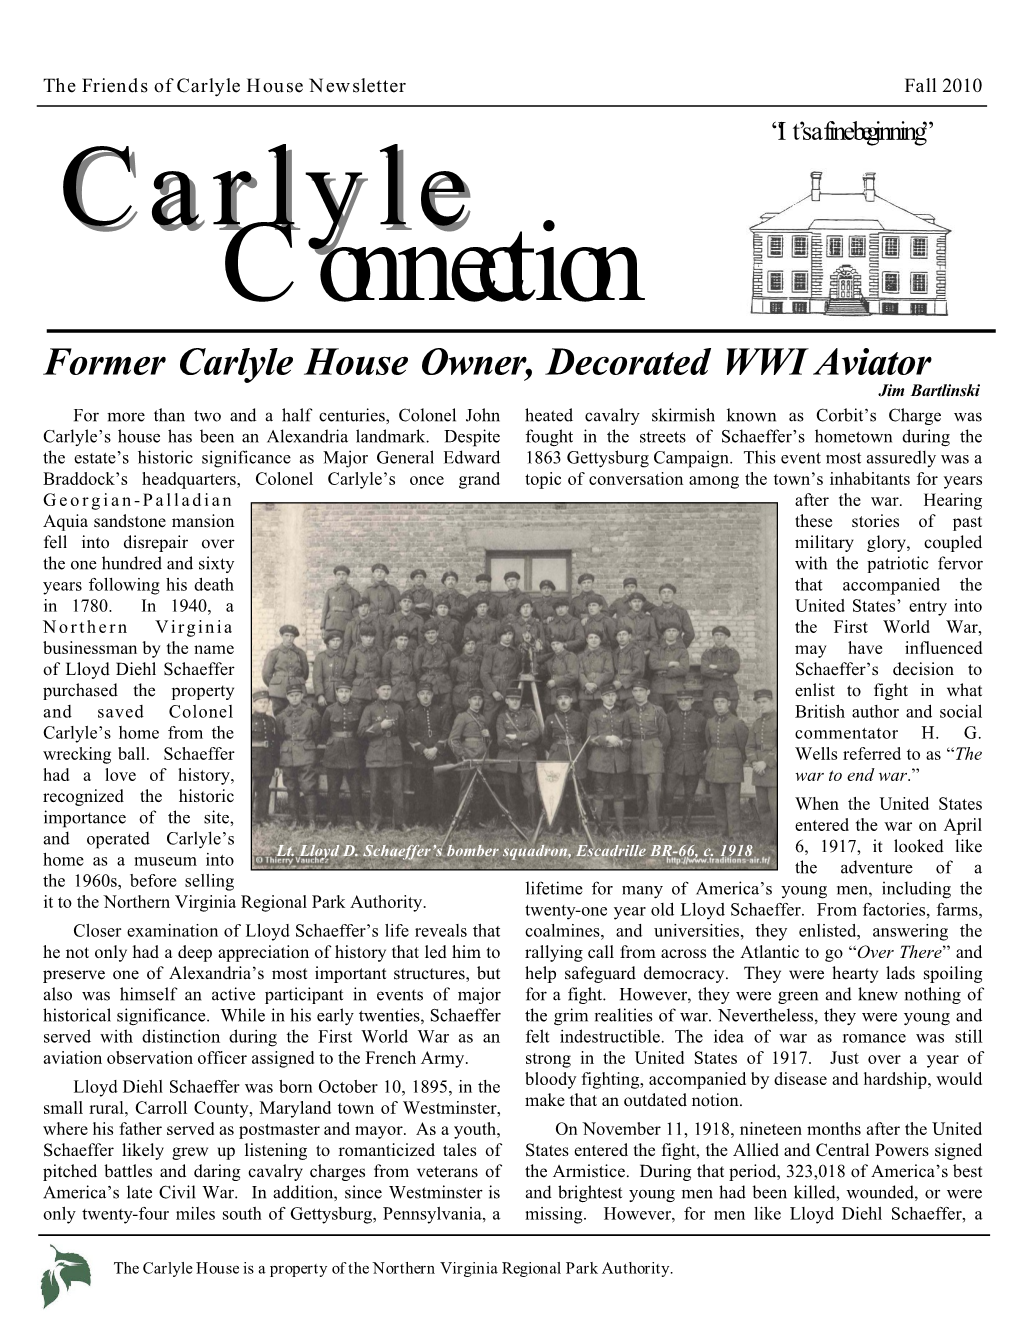 Former Carlyle House Owner, Decorated WWI Aviator